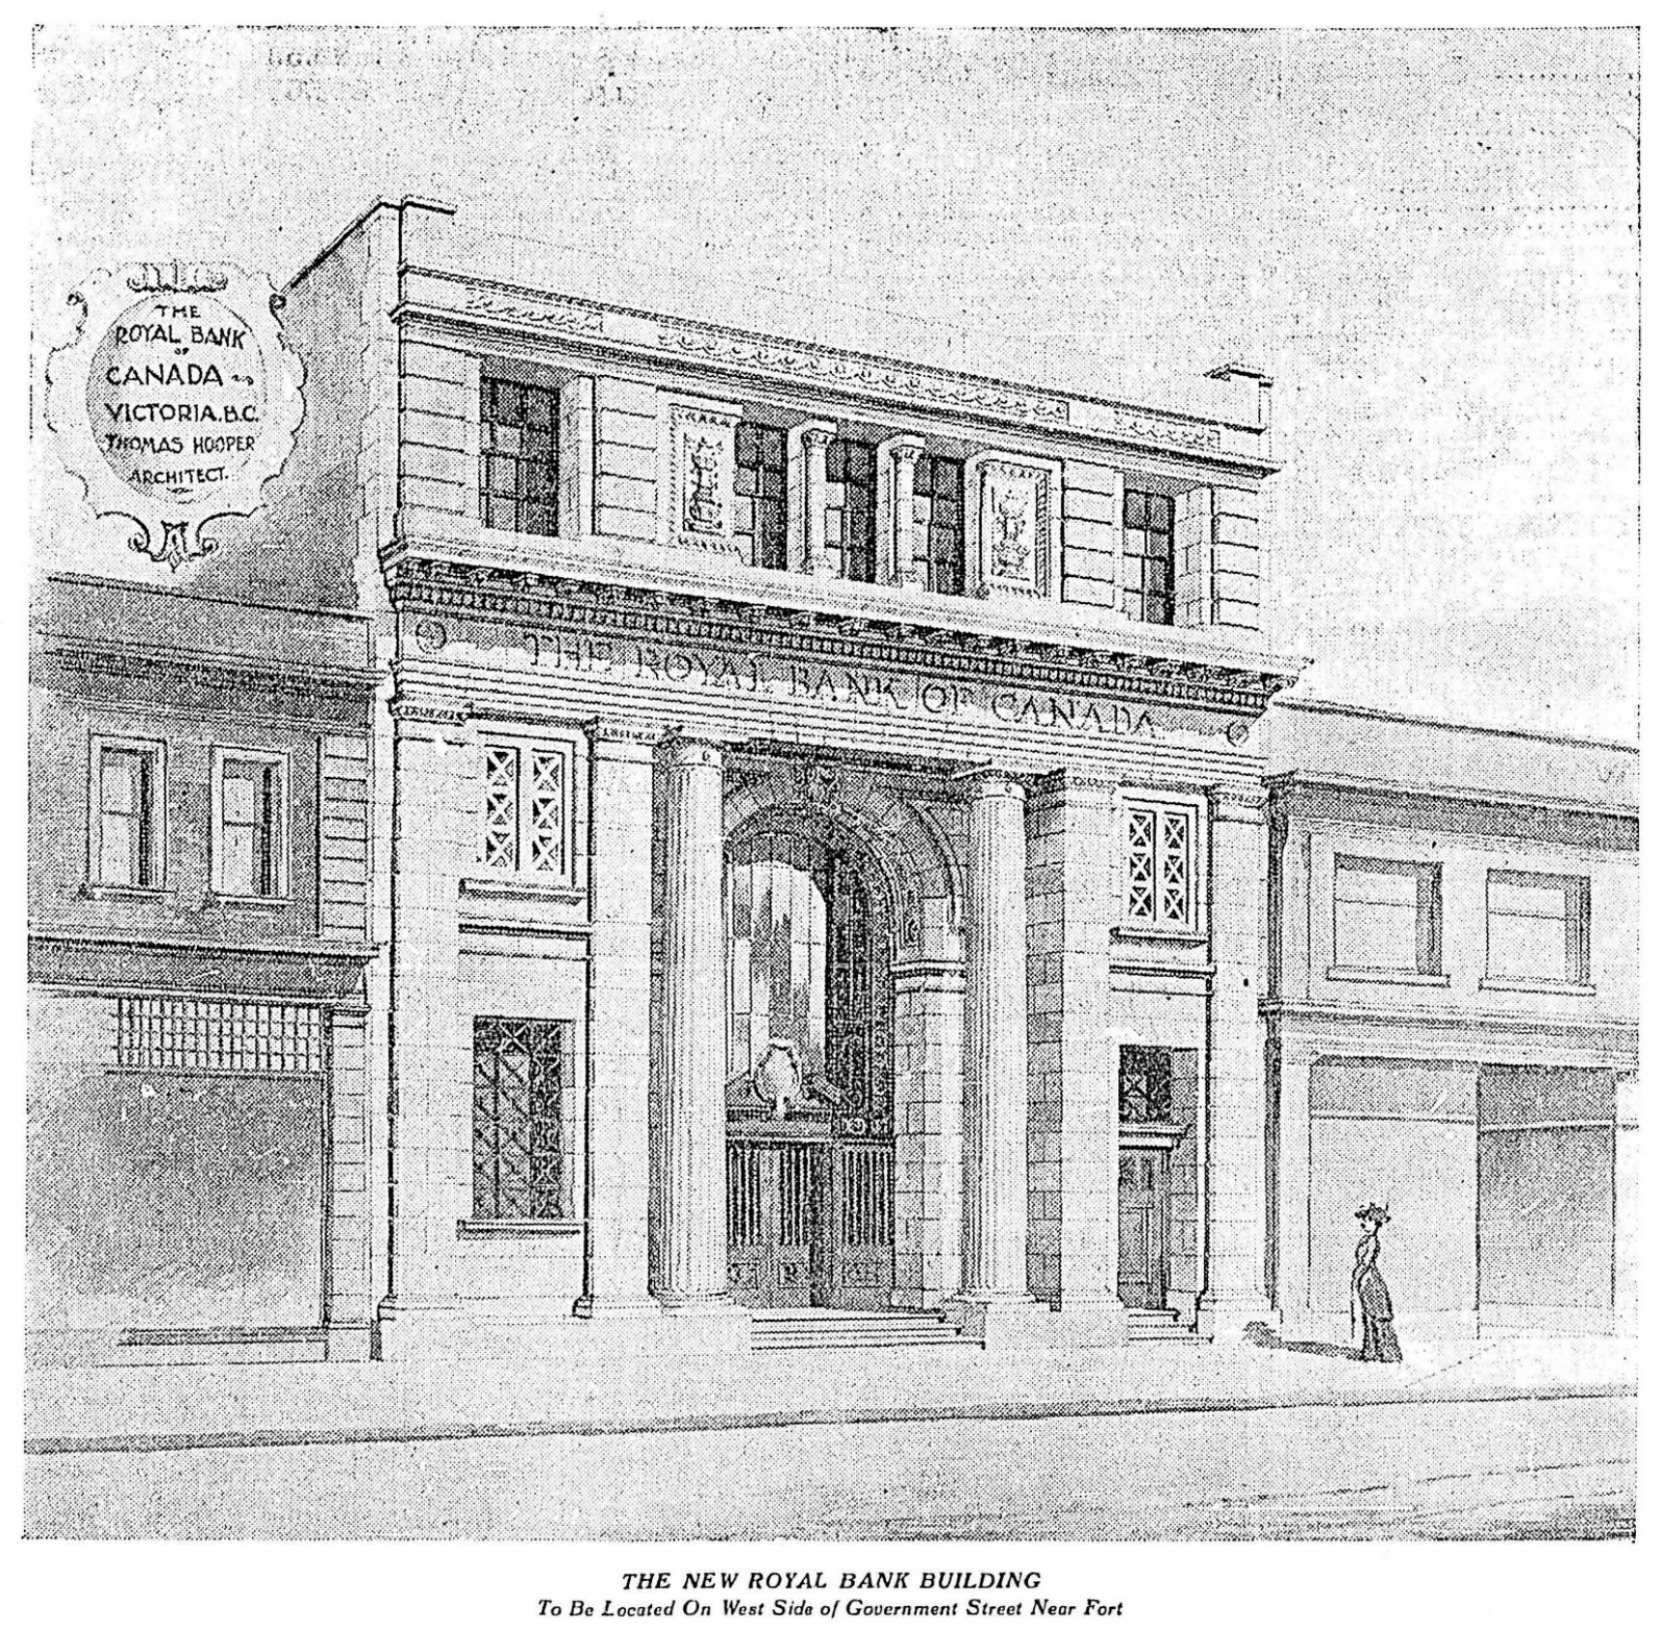 1909 promotional drawing of 1108 Government Street released by the Royal Bank of Canada and architect Thomas Hooper